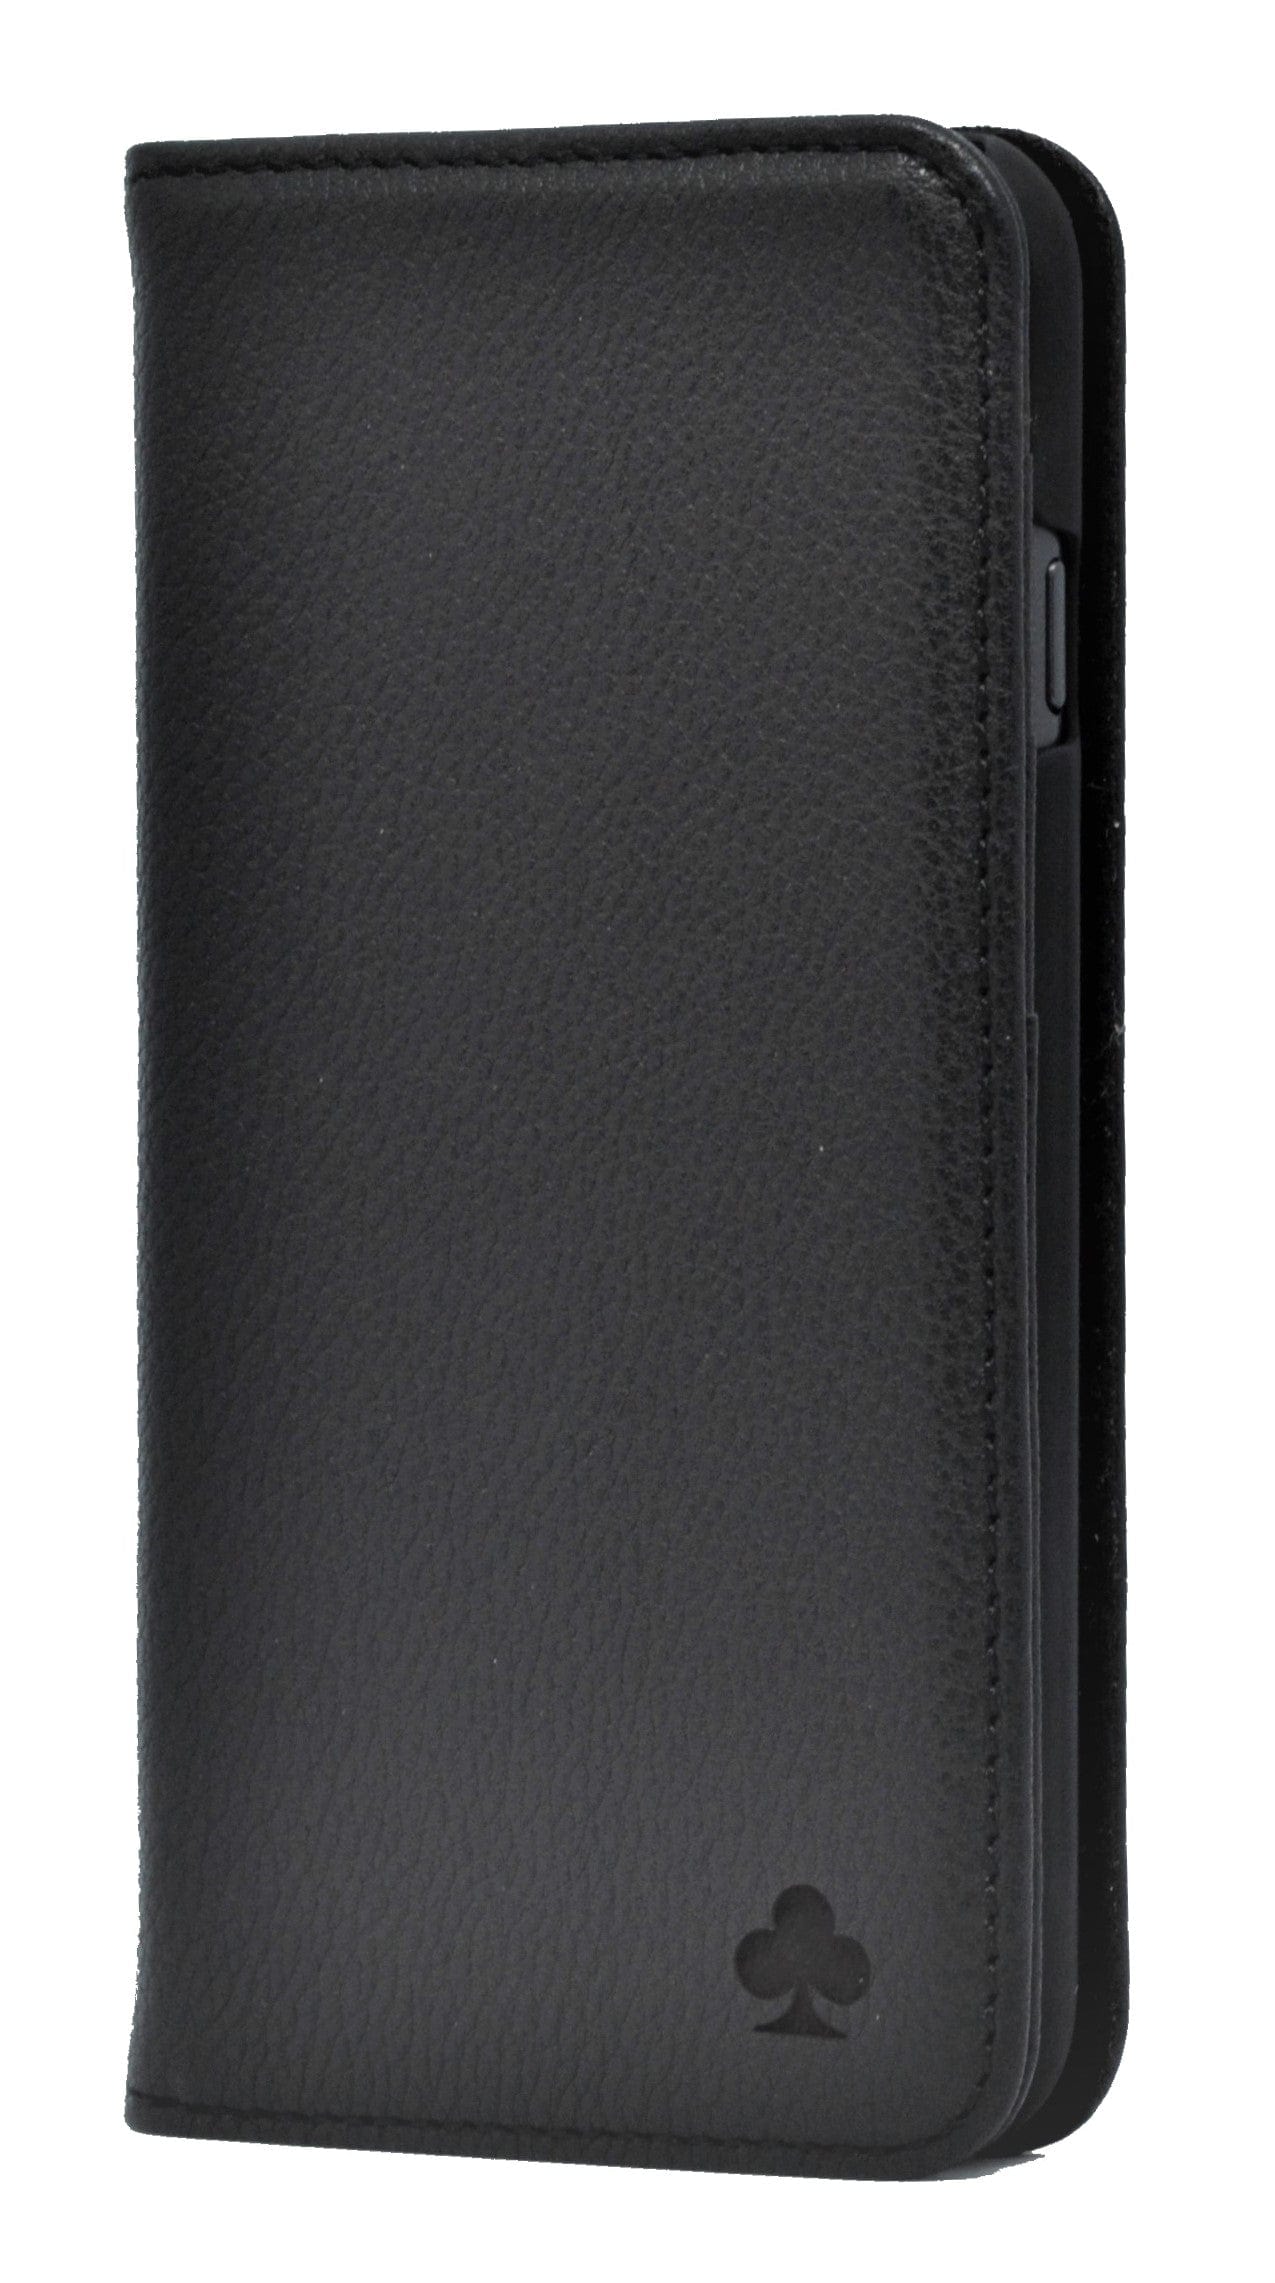 Samsung Galaxy S20 Ultra Leather Case. Premium Slim Genuine Leather Stand Case/Cover/Wallet (Black)